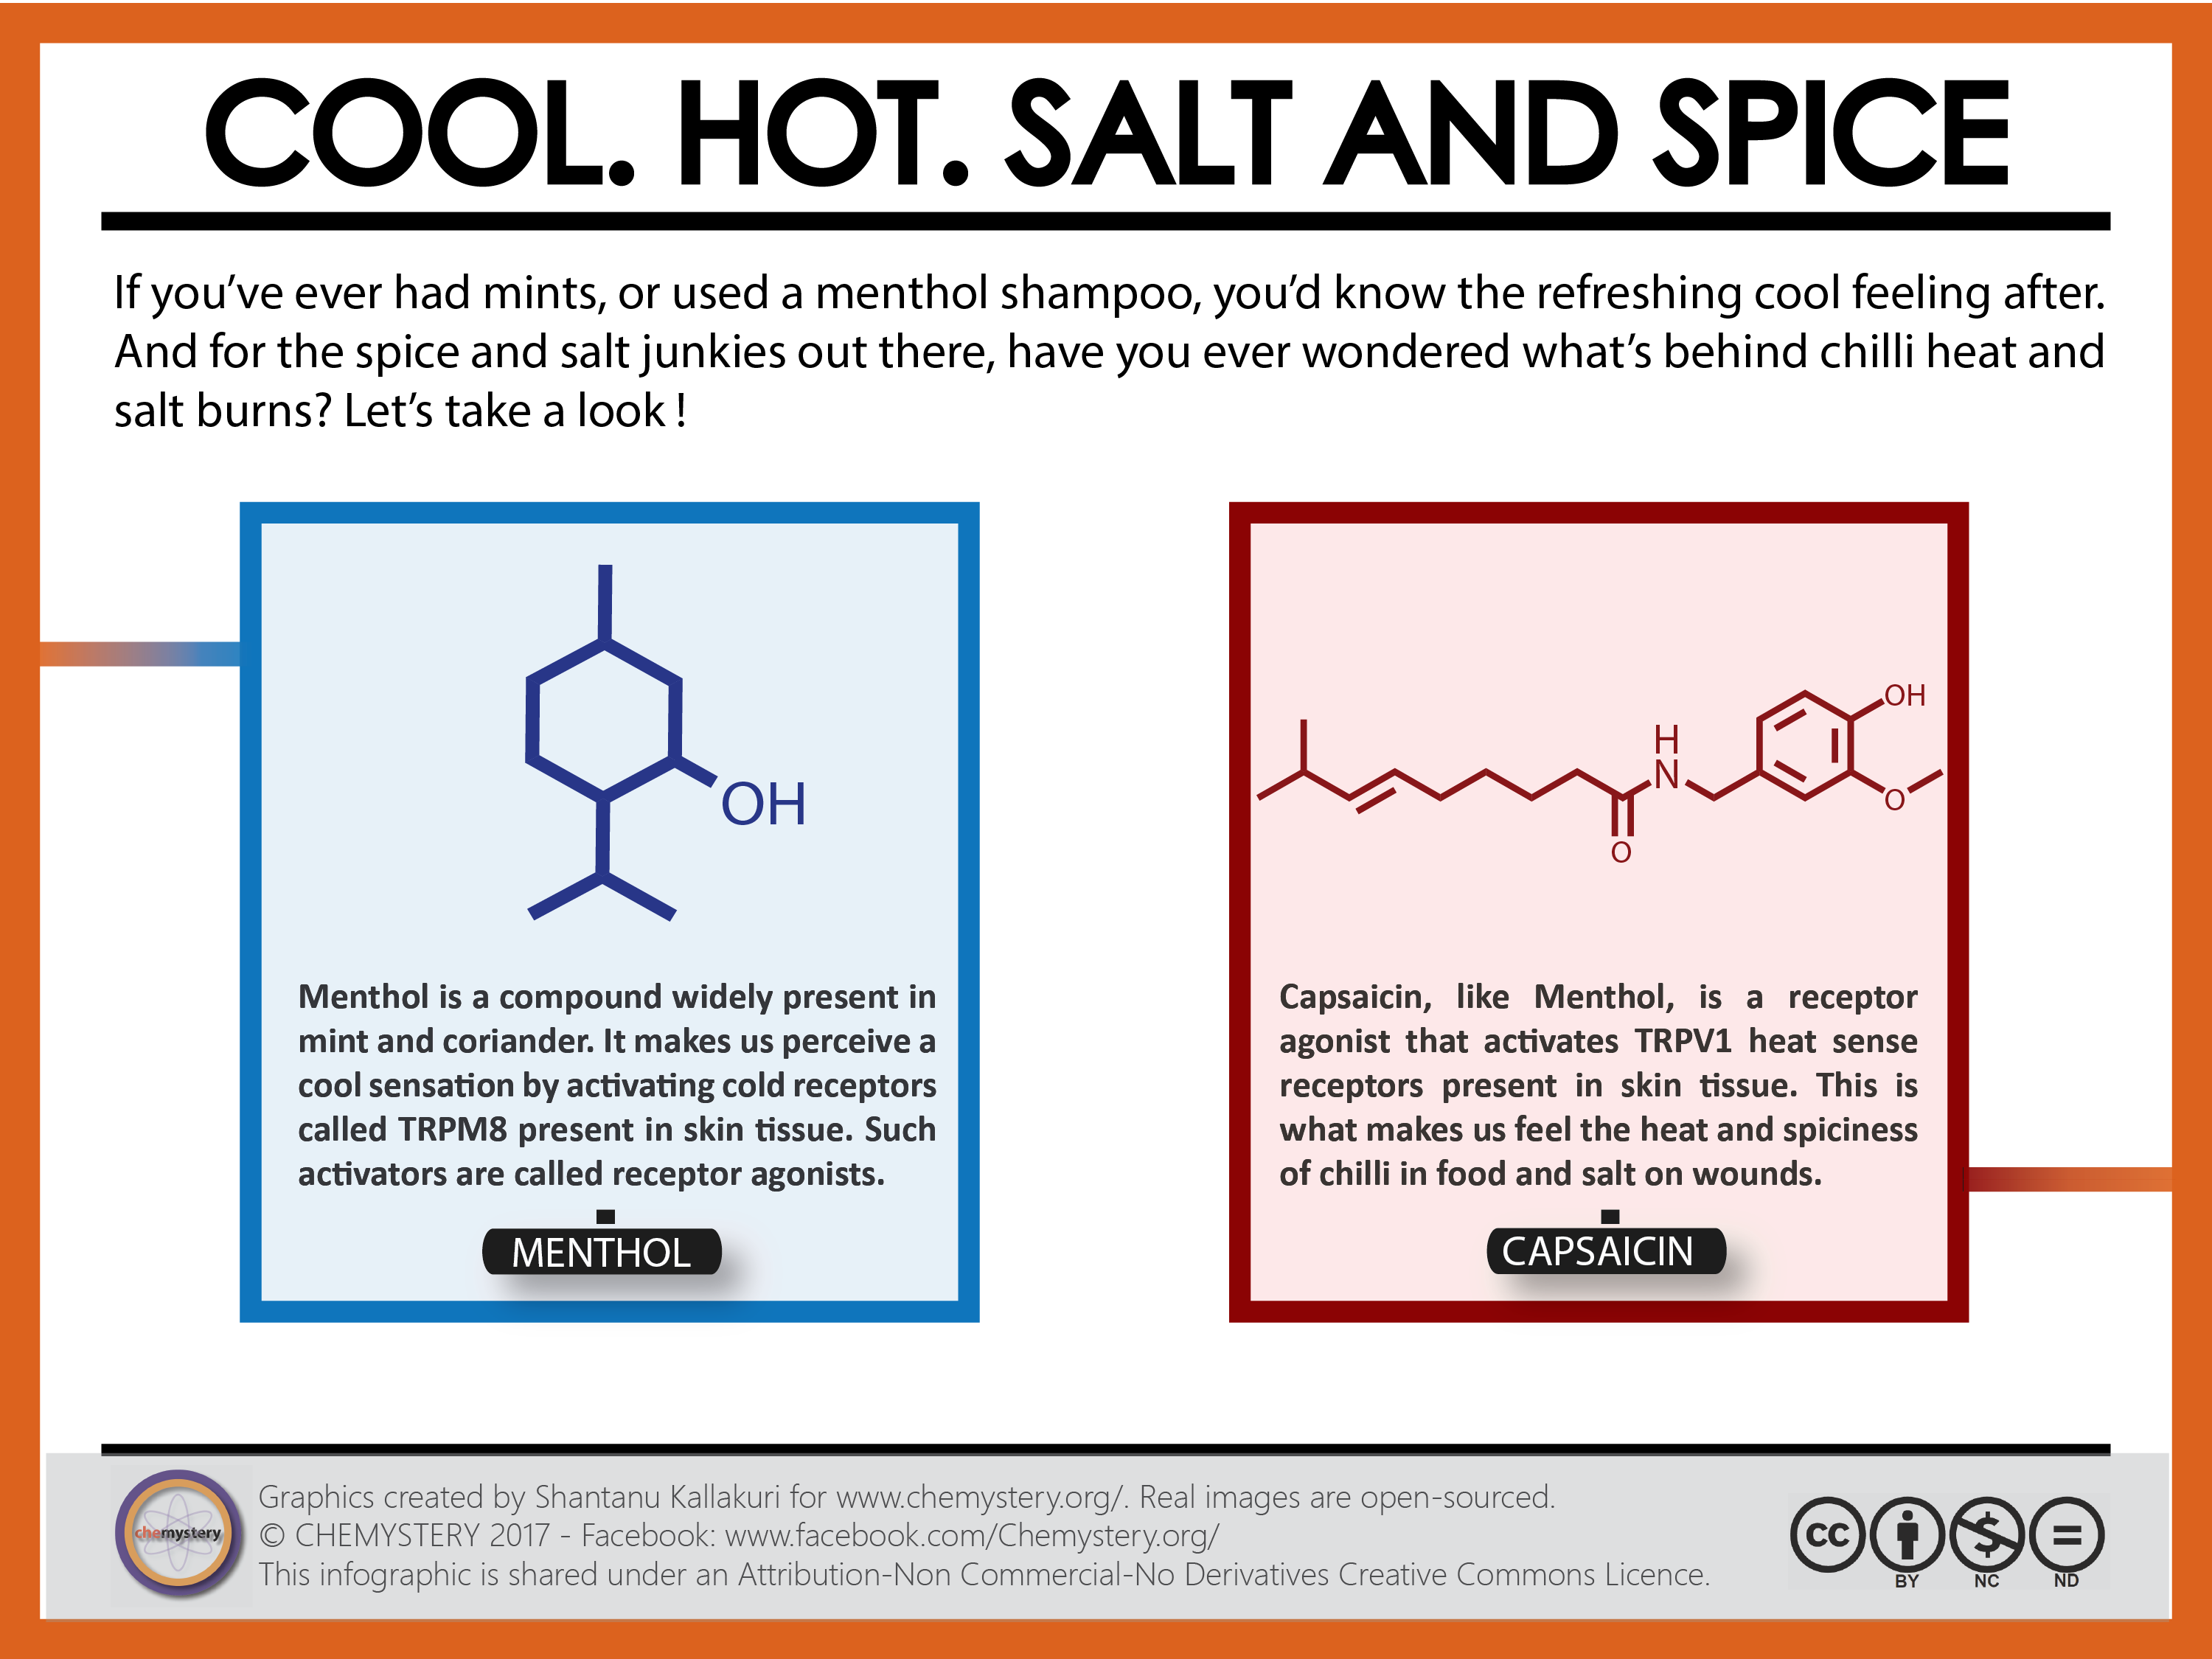 2. Heat and Cold. Menthol & Capsaicin!